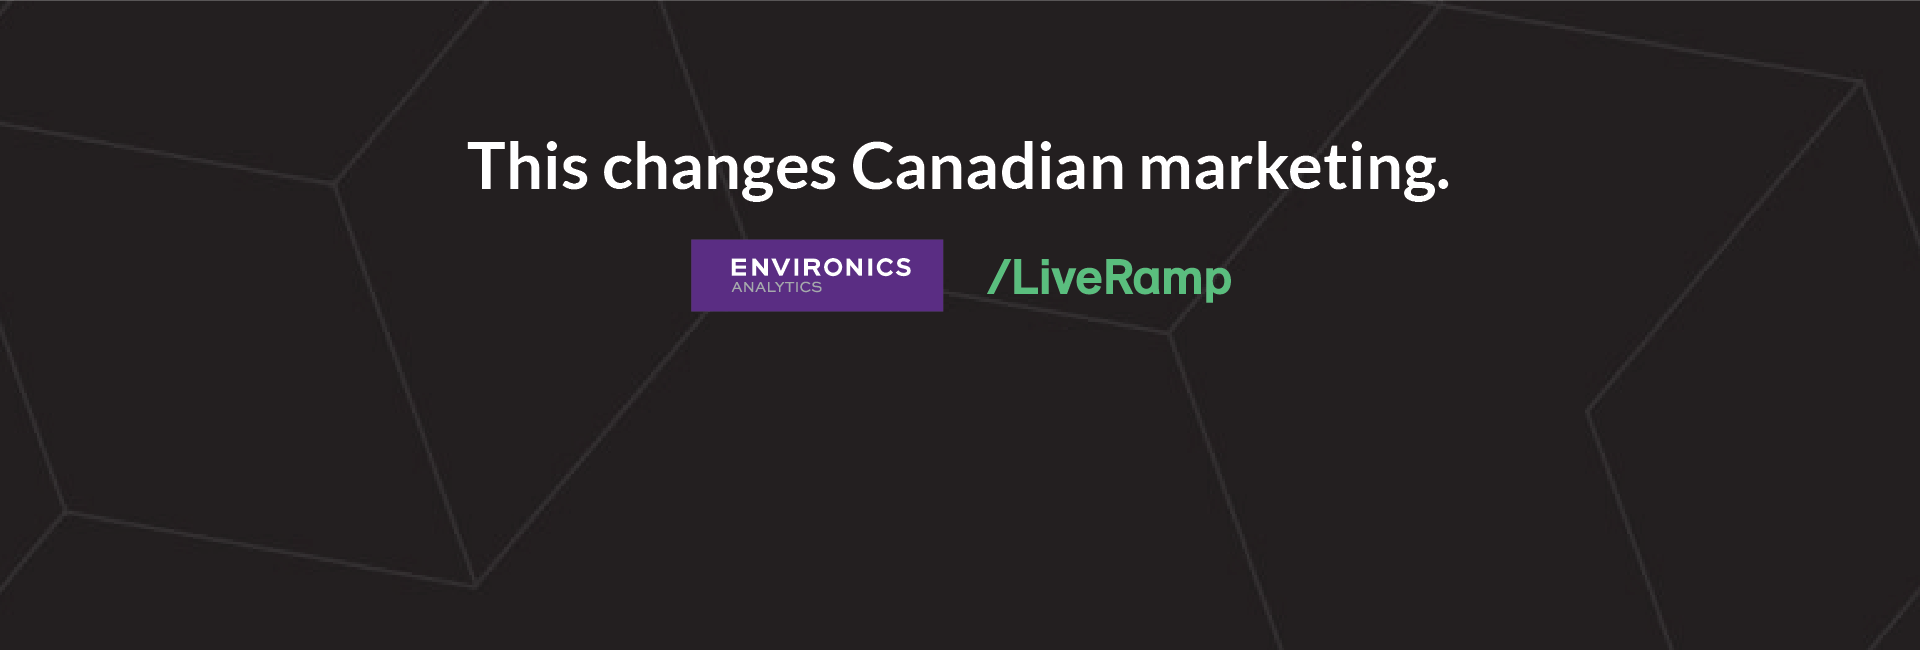 Black background with text saying this changes Canadian marketing. Environics Analytics logo and LiveRamp logo.